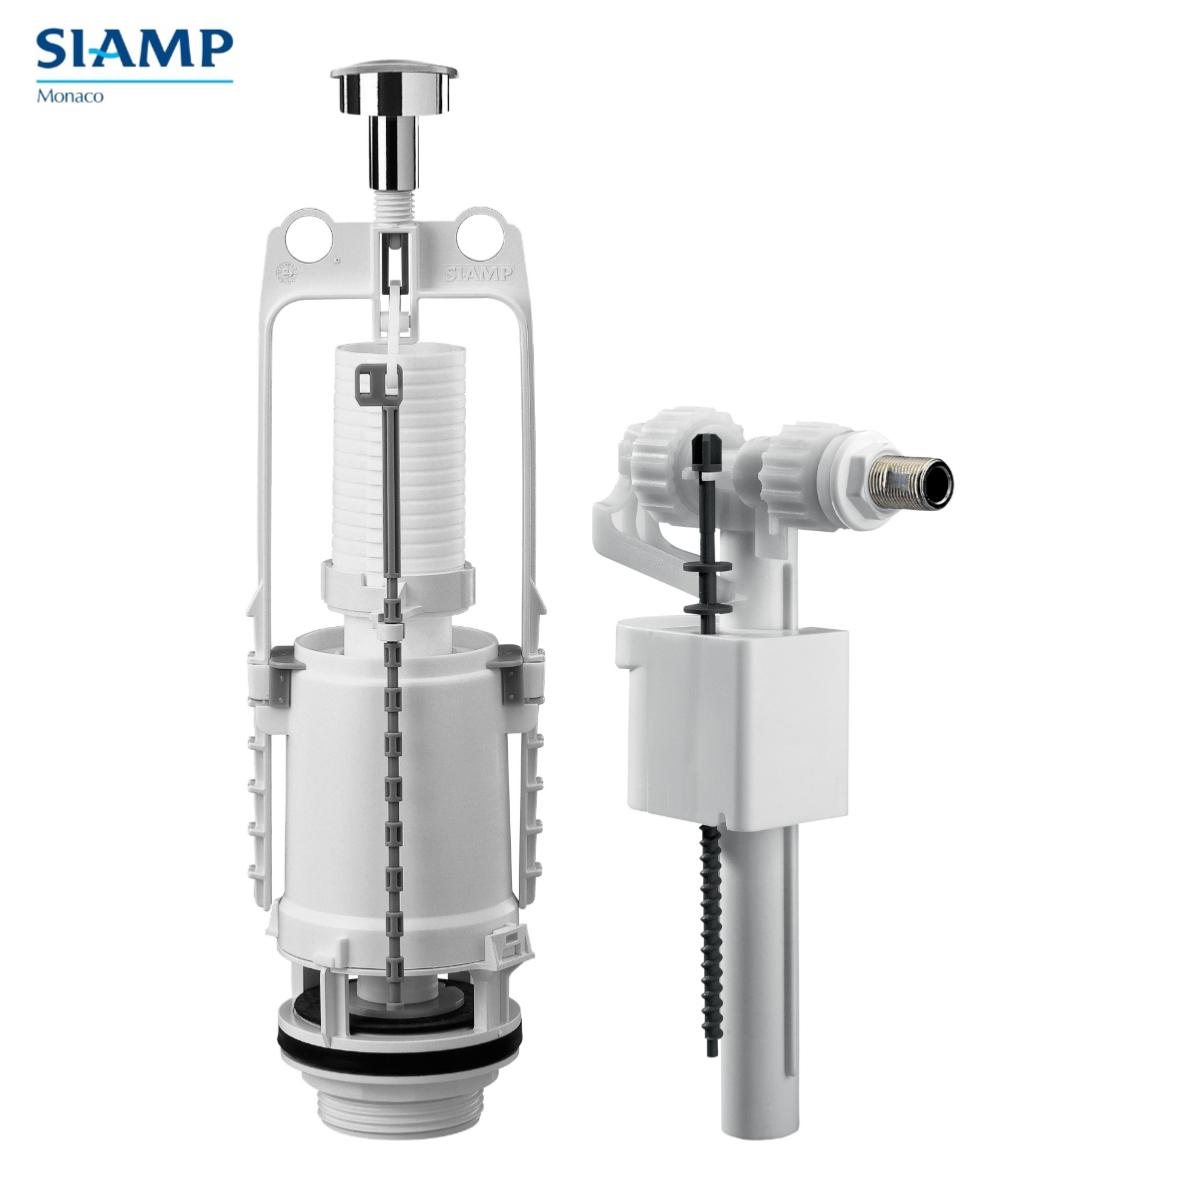 Siamp арматура. Siamp Switch 22a. Siamp Monaco сливная арматура. Siamp Monaco арматура для унитаза. Siamp Compact 95l мембрана.